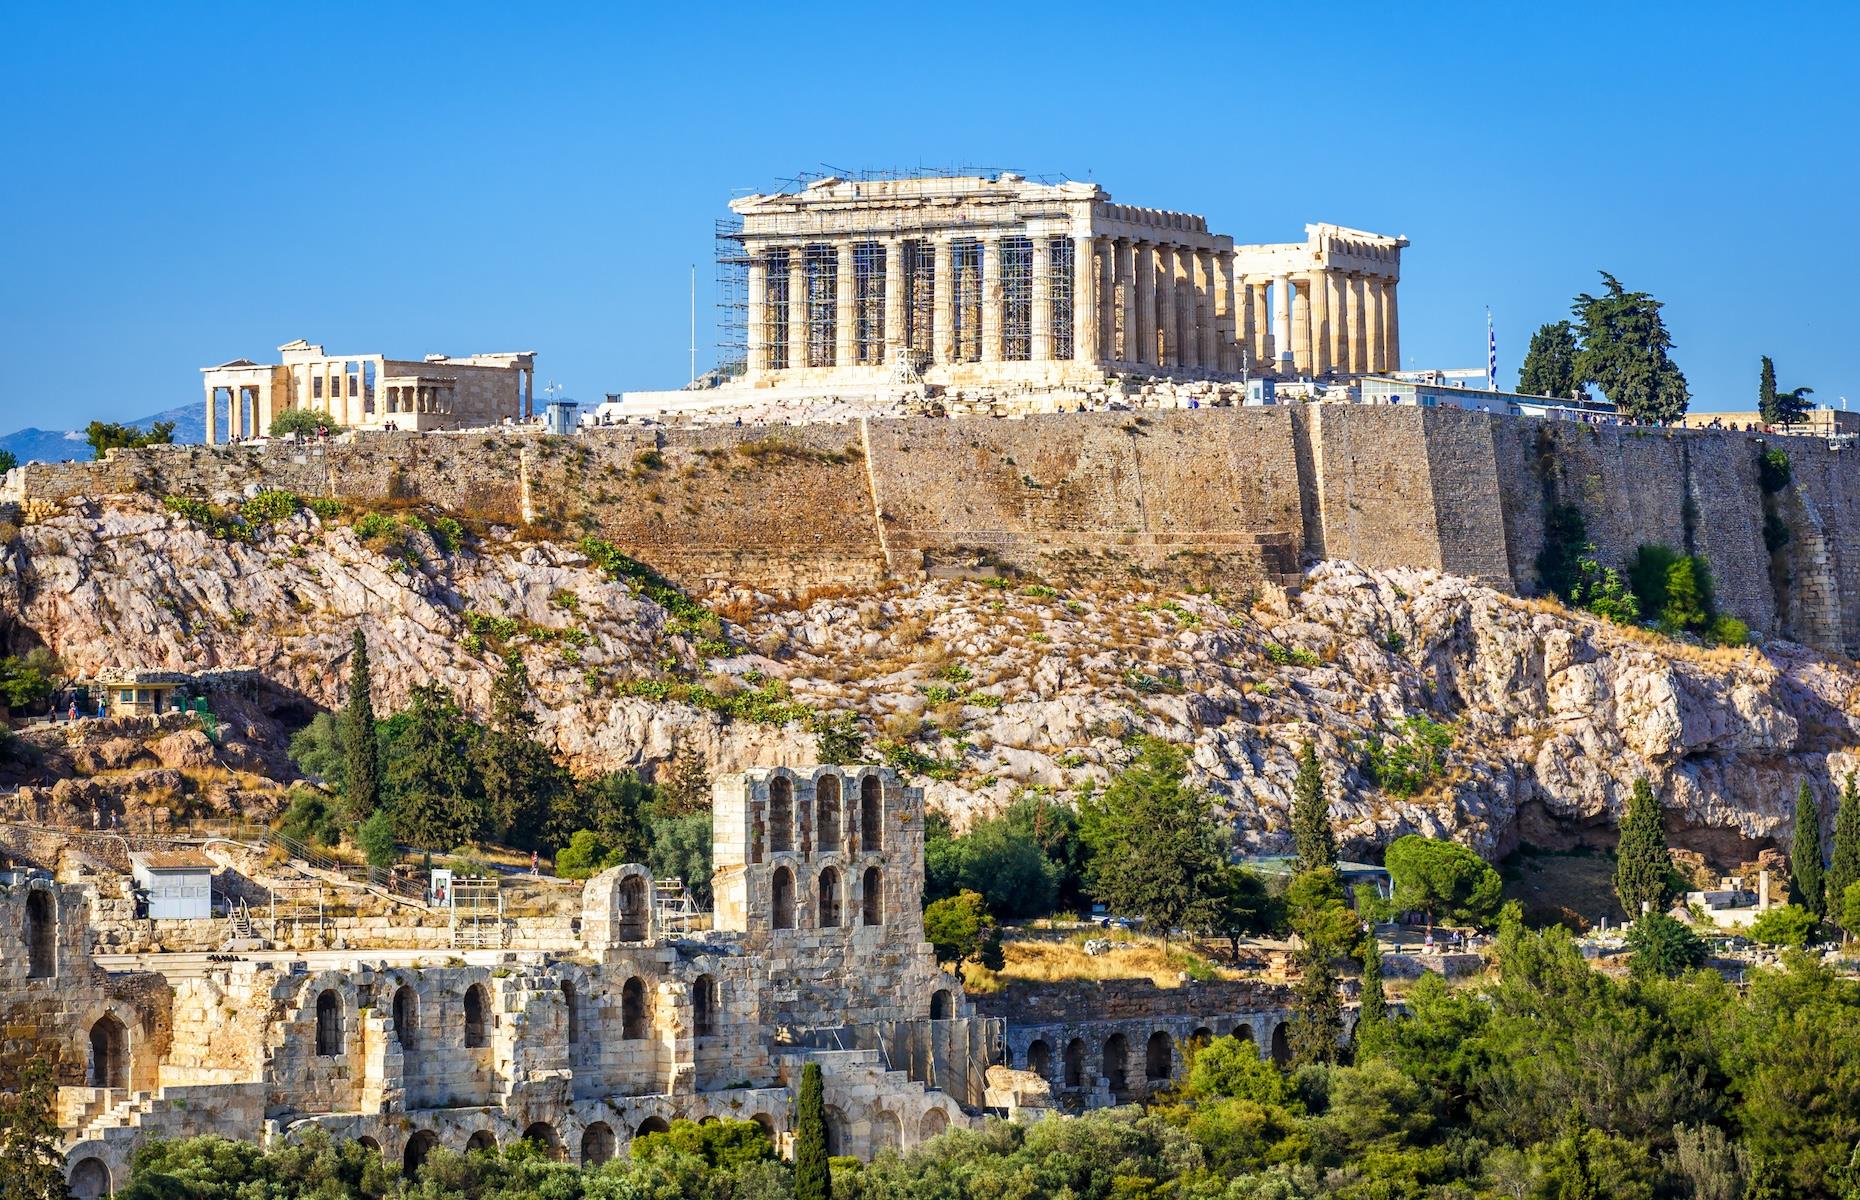 One of the world’s most impressive and significant archaeological sites, the Acropolis is the crowning glory of a getaway to Athens. As well as its famed marble temples and storied theatres, the limestone crag is home to the nearby much-lauded Acropolis Museum, a veritable treasure trove of classical relics. However, it pays to plan your visit to this sprawling site carefully to avoid some unpleasant experiences.